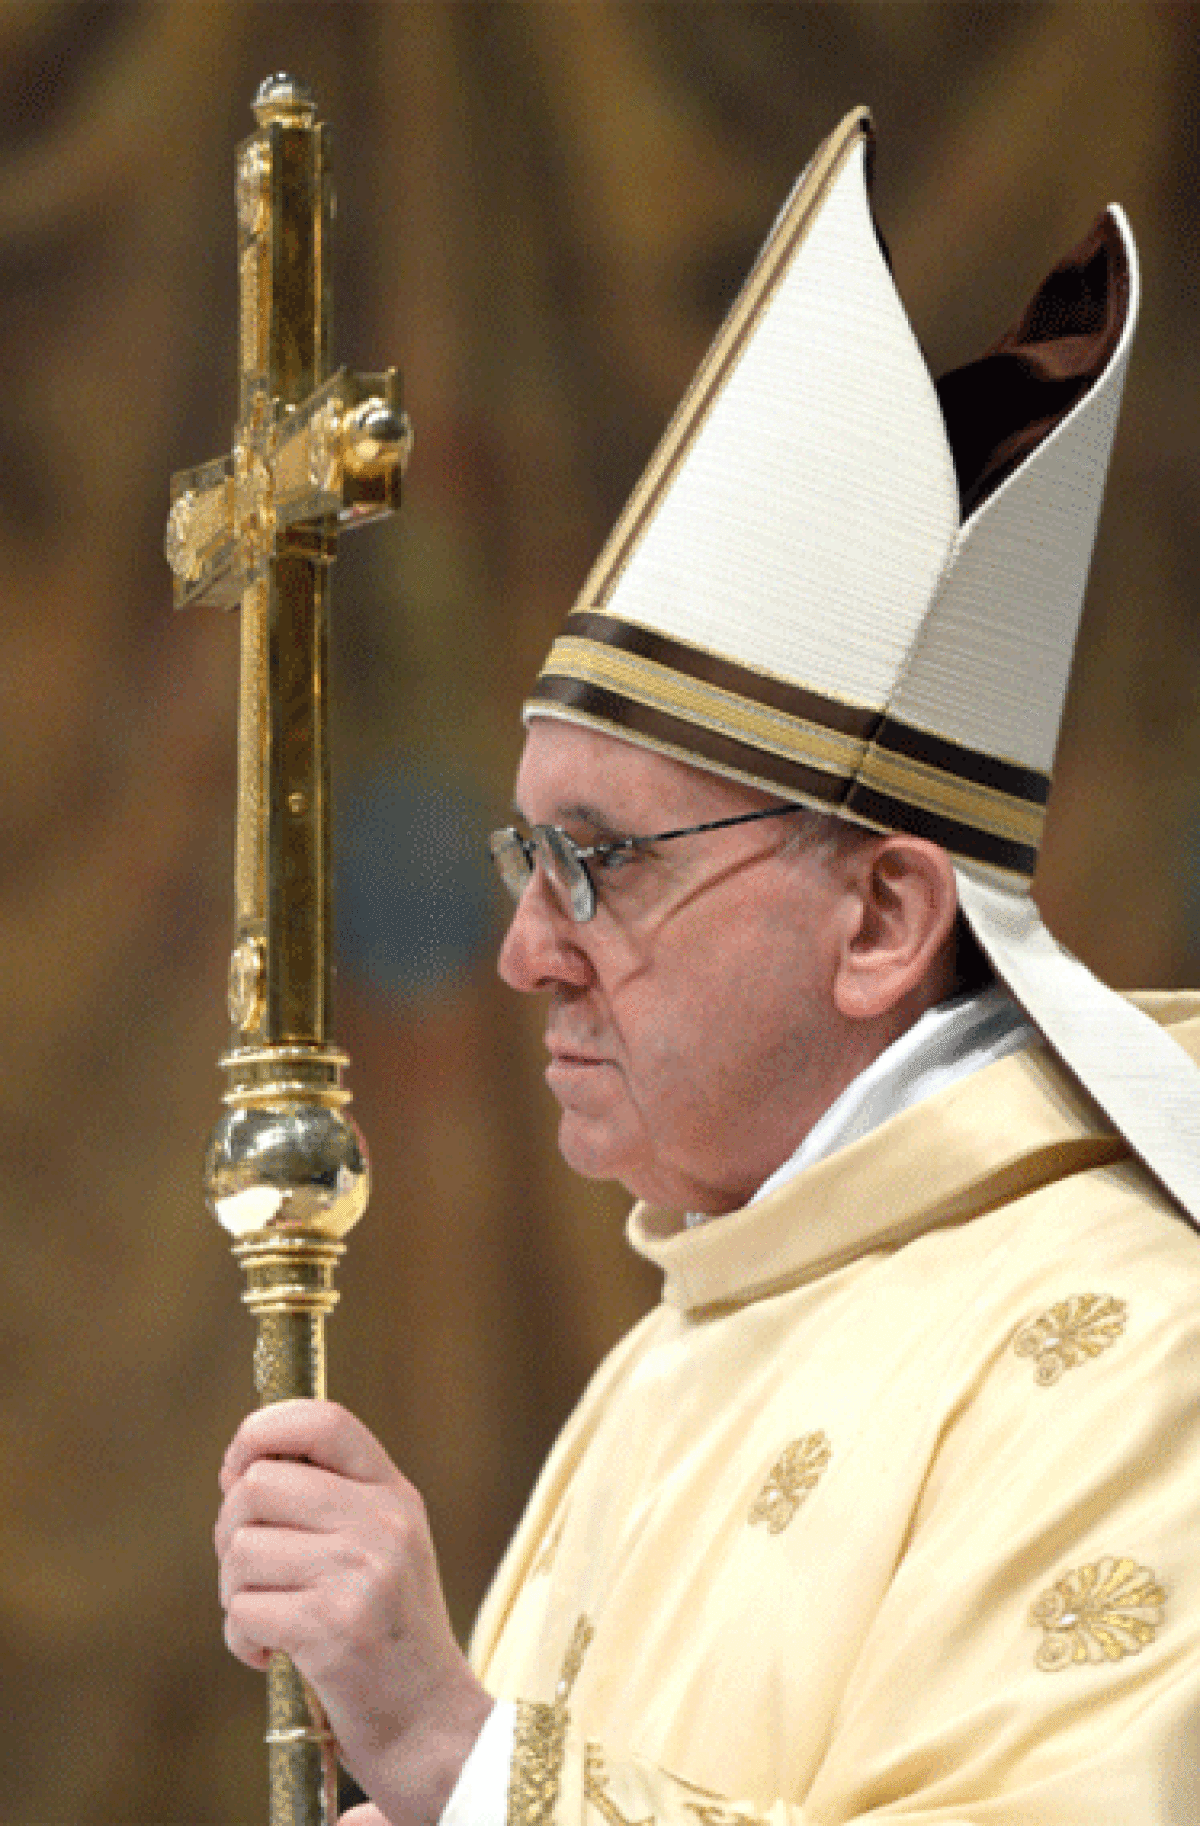 Pope Francis is the church's first Latin American leader.